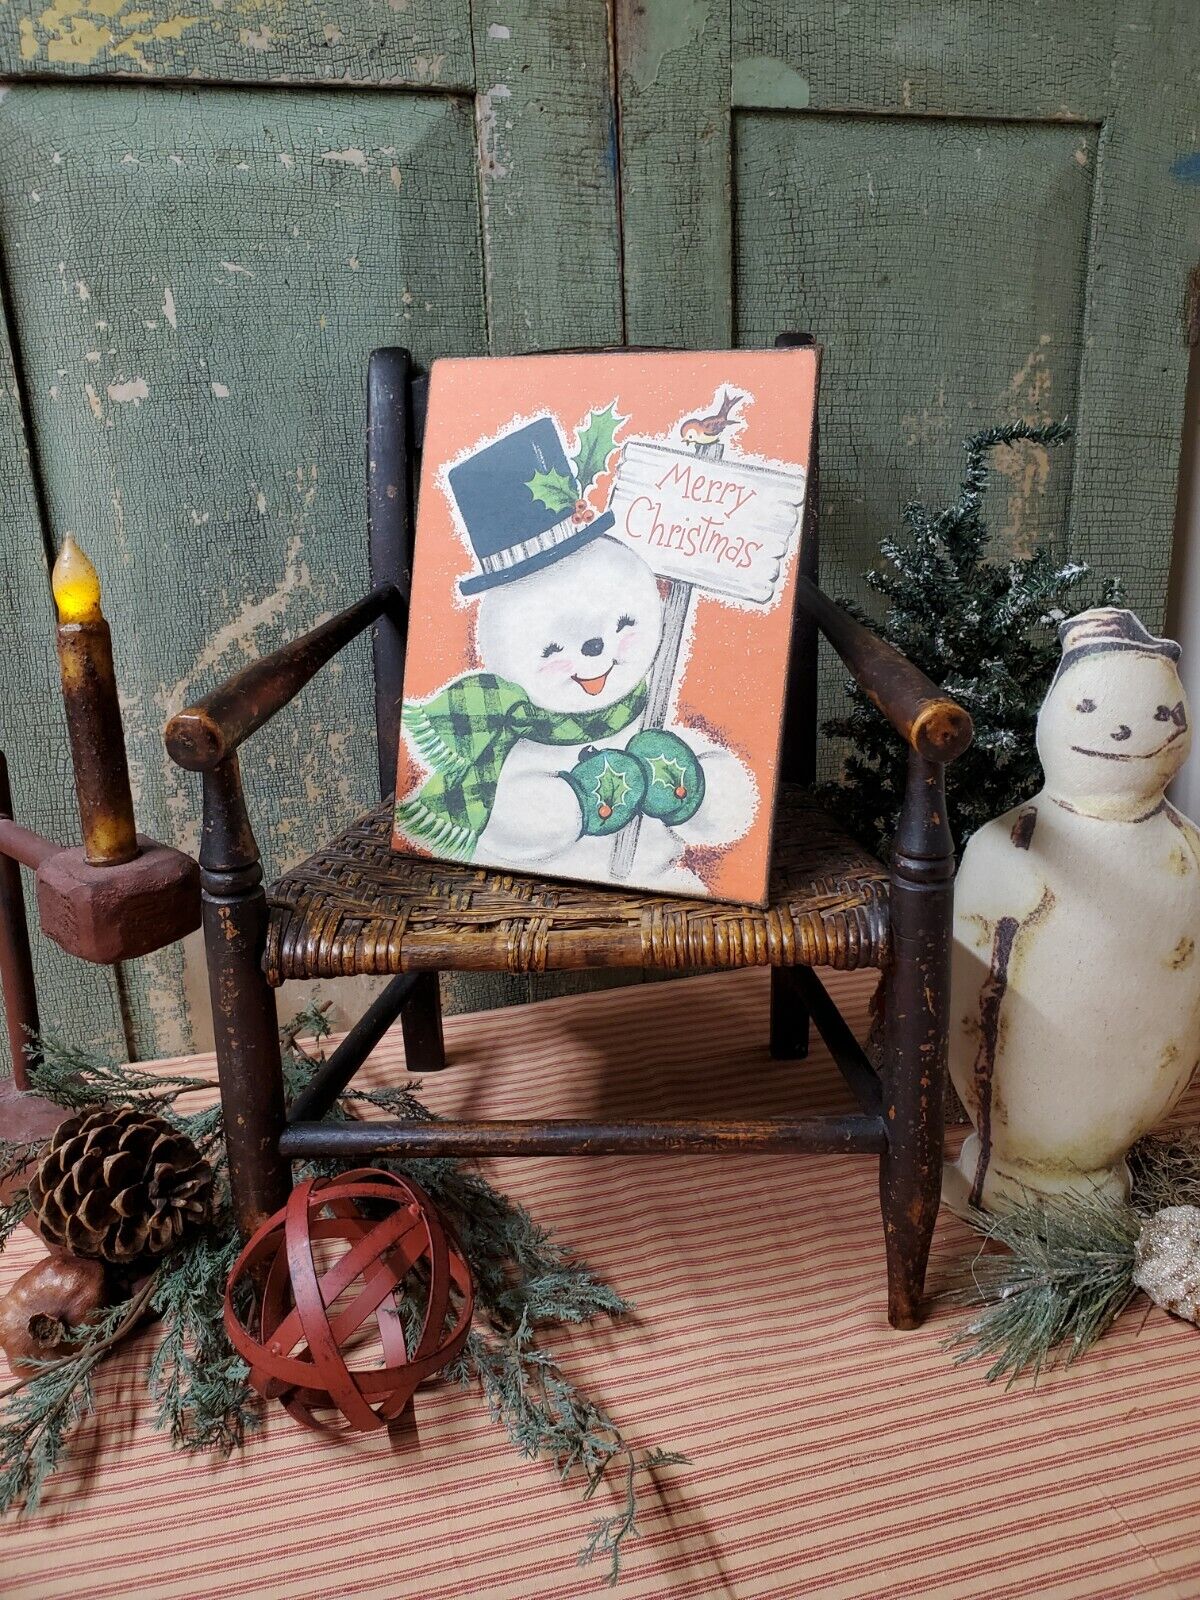 OLD VINTAGE MODERN RETRO STYLE ADORABLE JOLLY SNOWMAN WITH MERRY CHRISTMAS SIGN